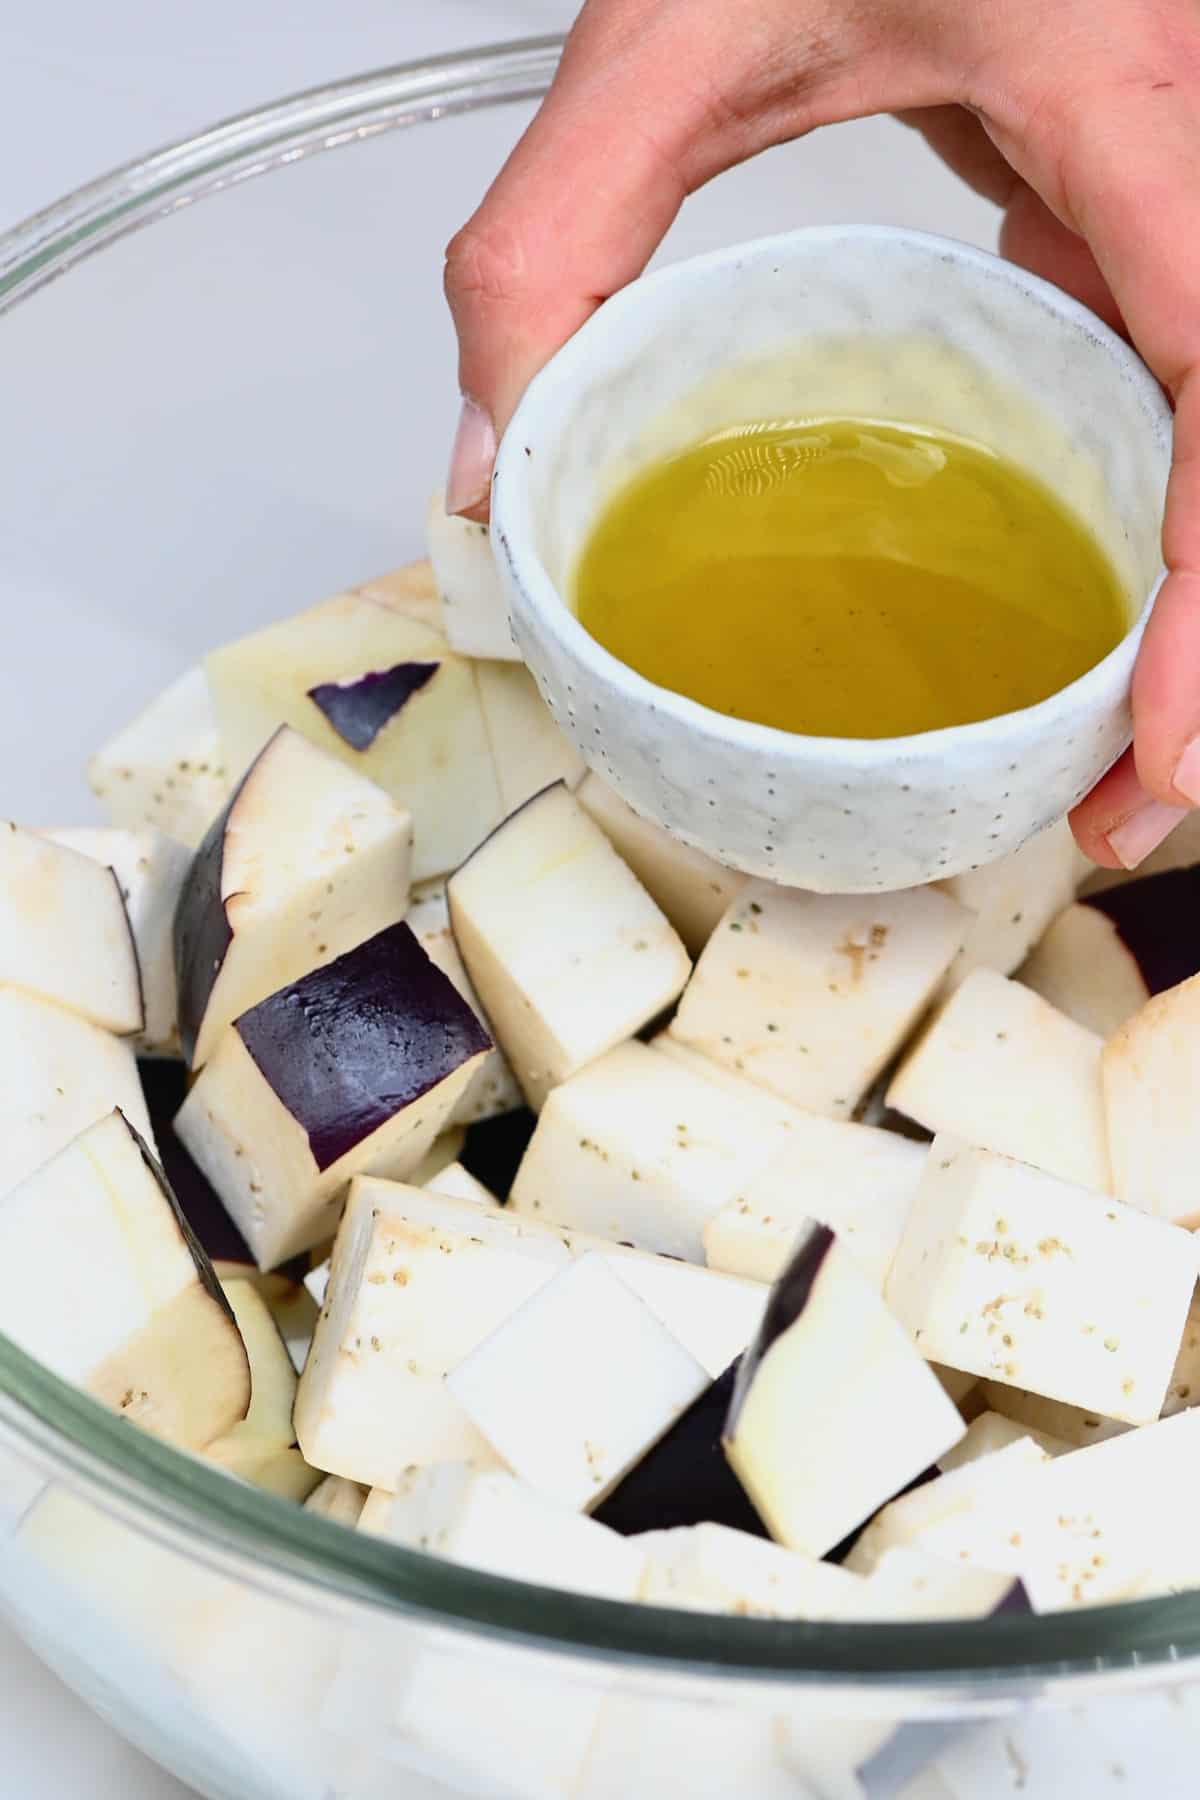 Mixing oil with eggplant cubes